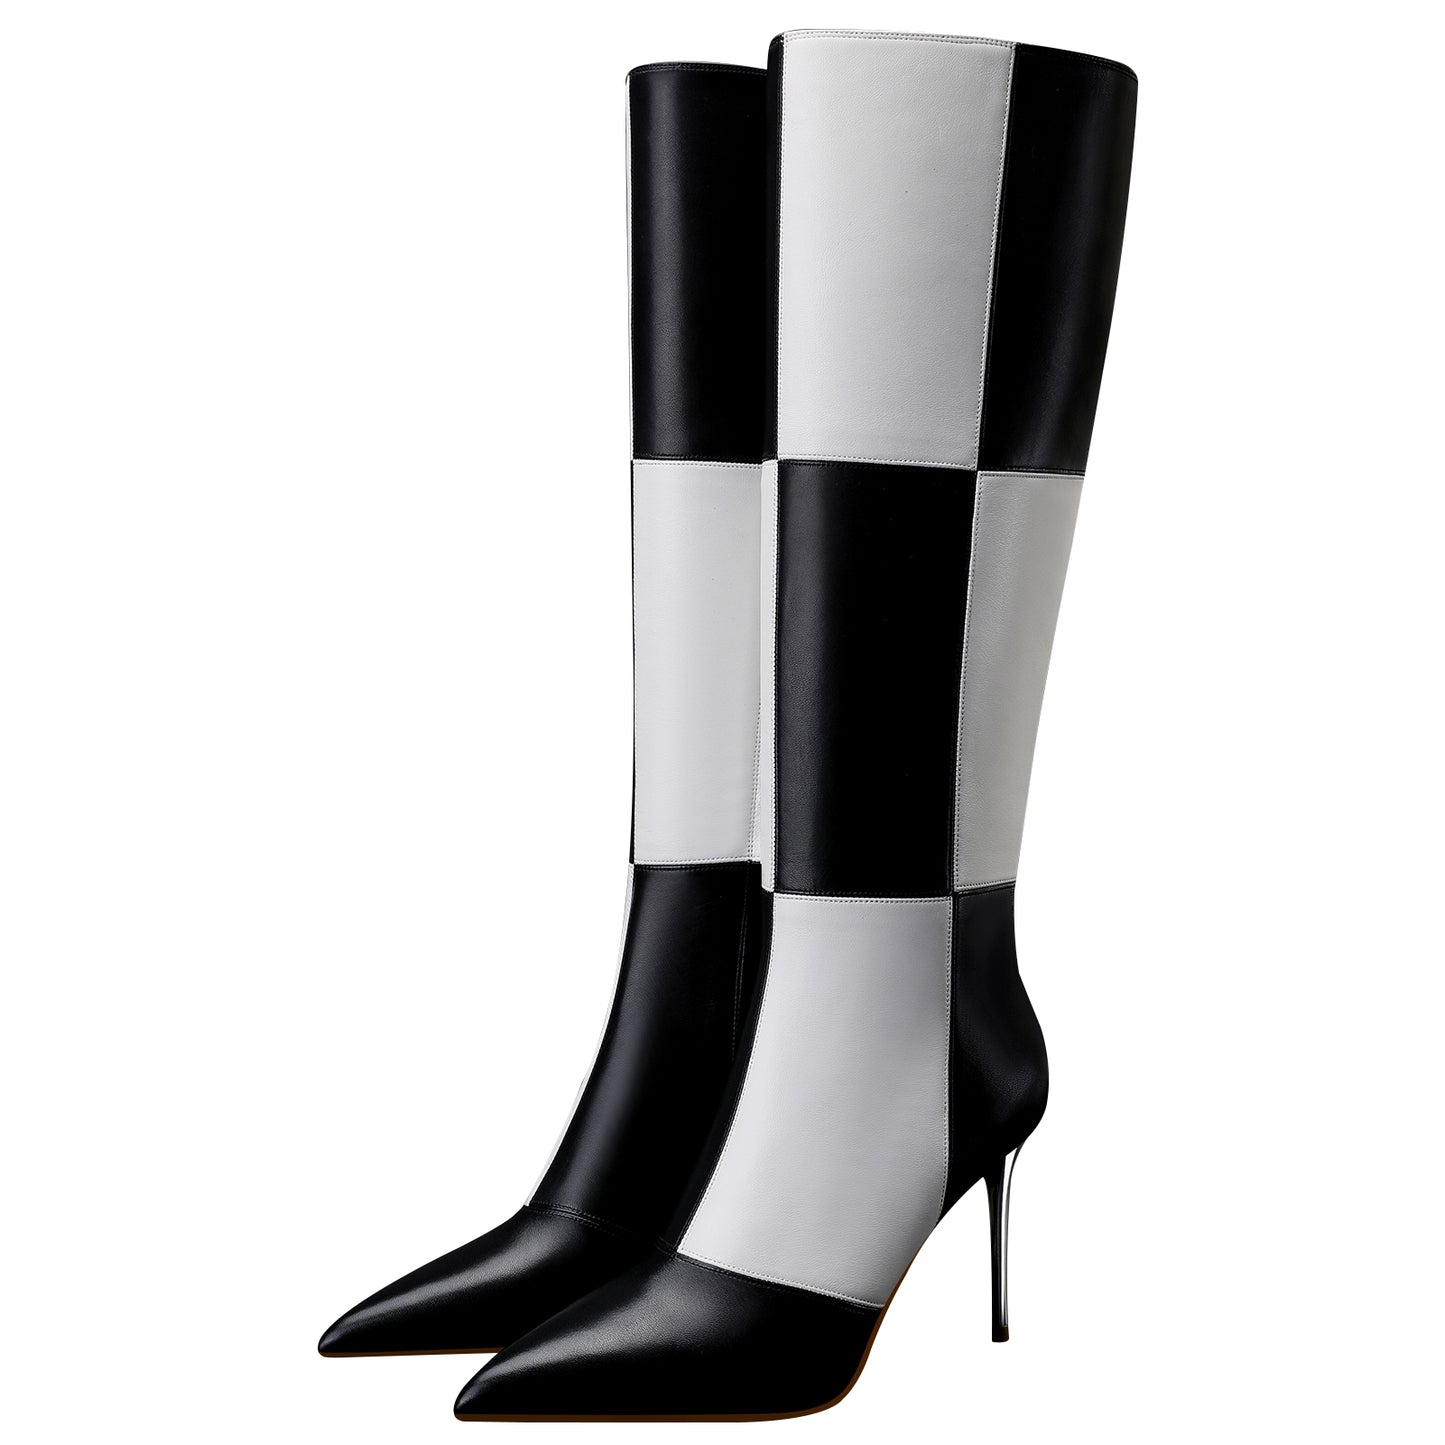 High Heels Boots, Zipper Tall Boots Leather Pointed Toe Stitching